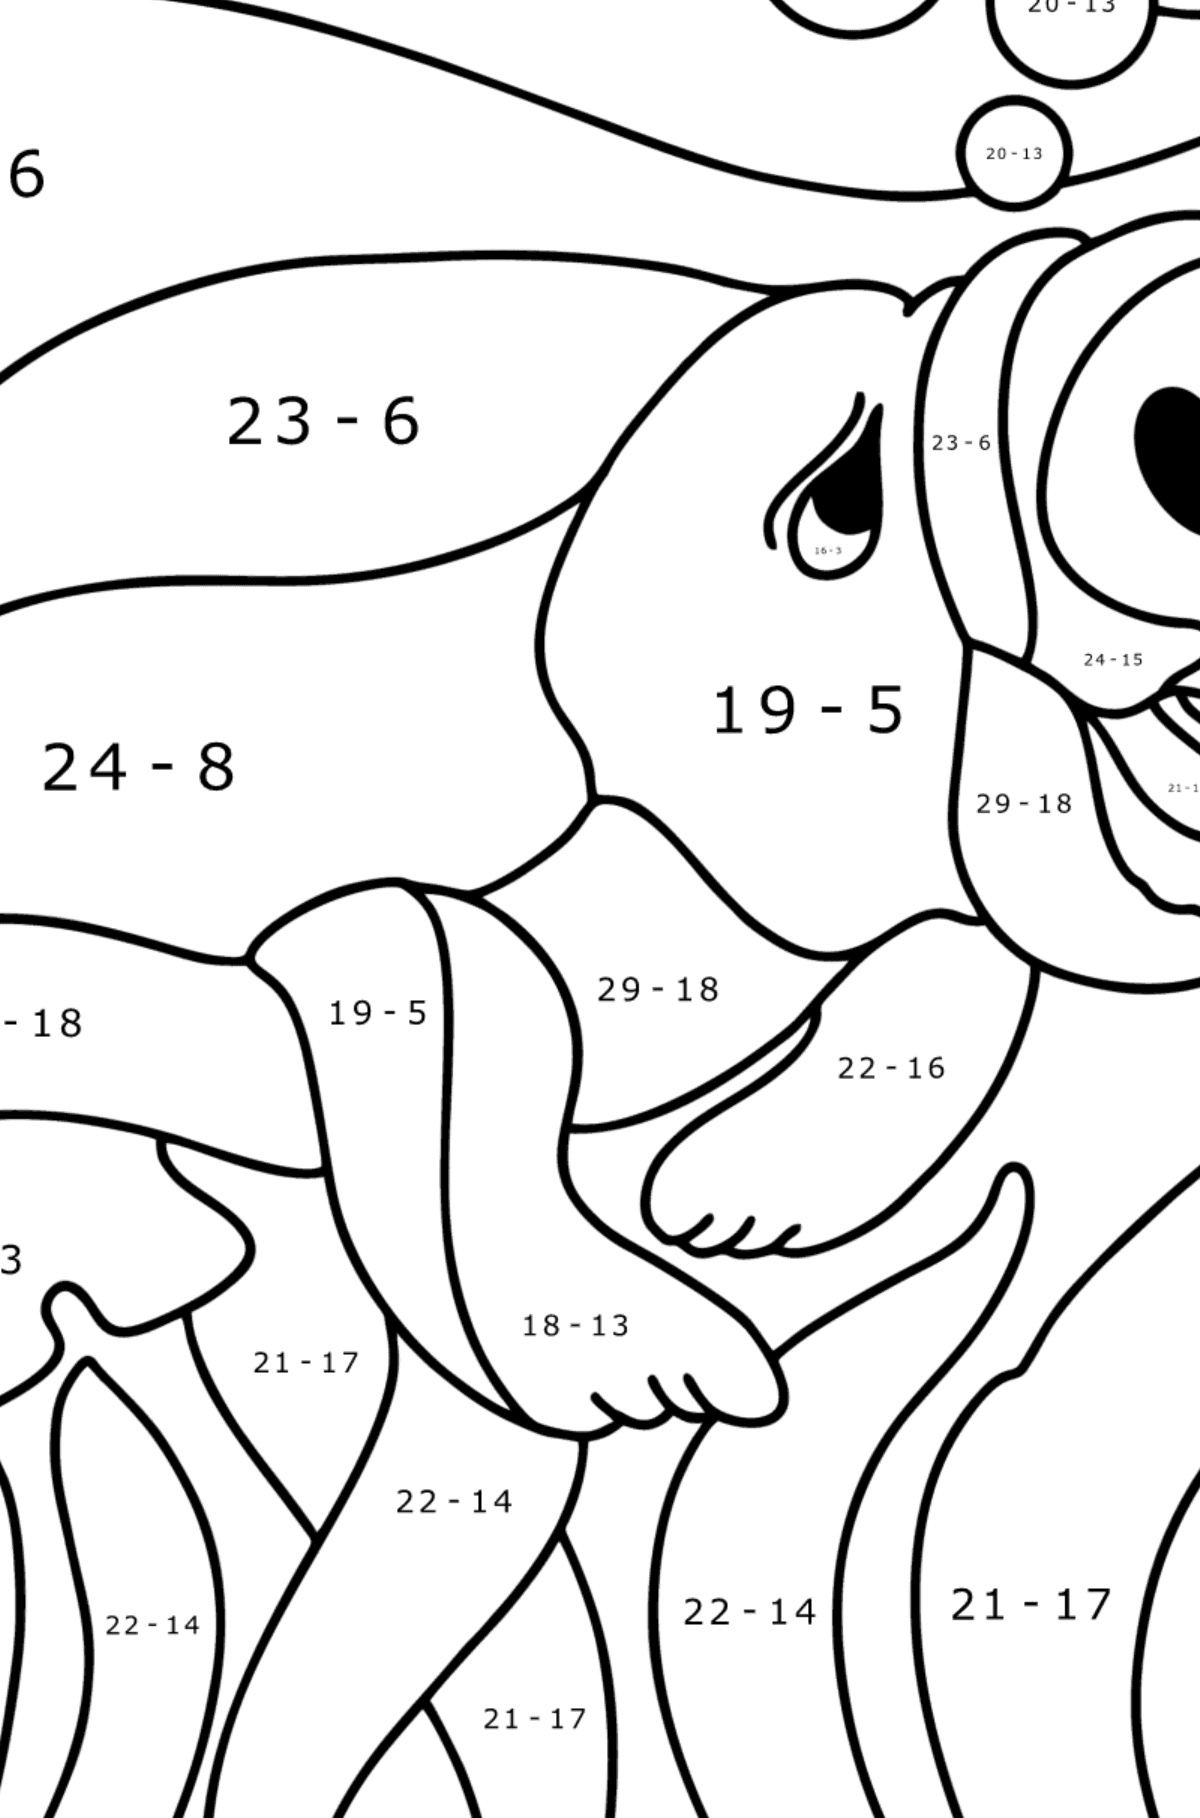 Stellar Cow coloring page - Math Coloring - Subtraction for Kids